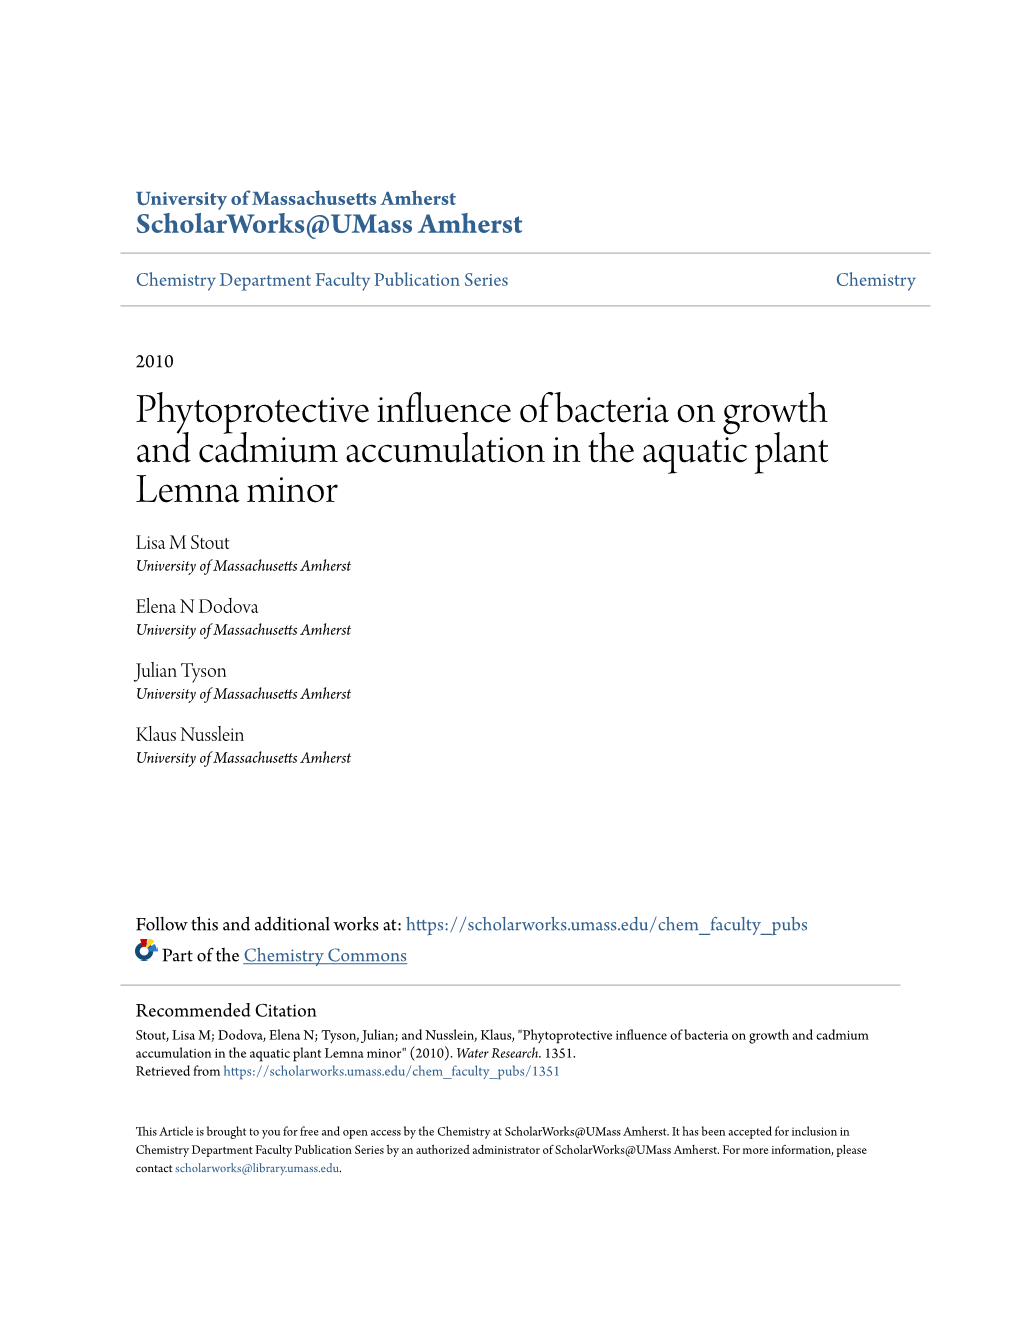 Phytoprotective Influence of Bacteria on Growth and Cadmium Accumulation in the Aquatic Plant Lemna Minor Lisa M Stout University of Massachusetts Amherst